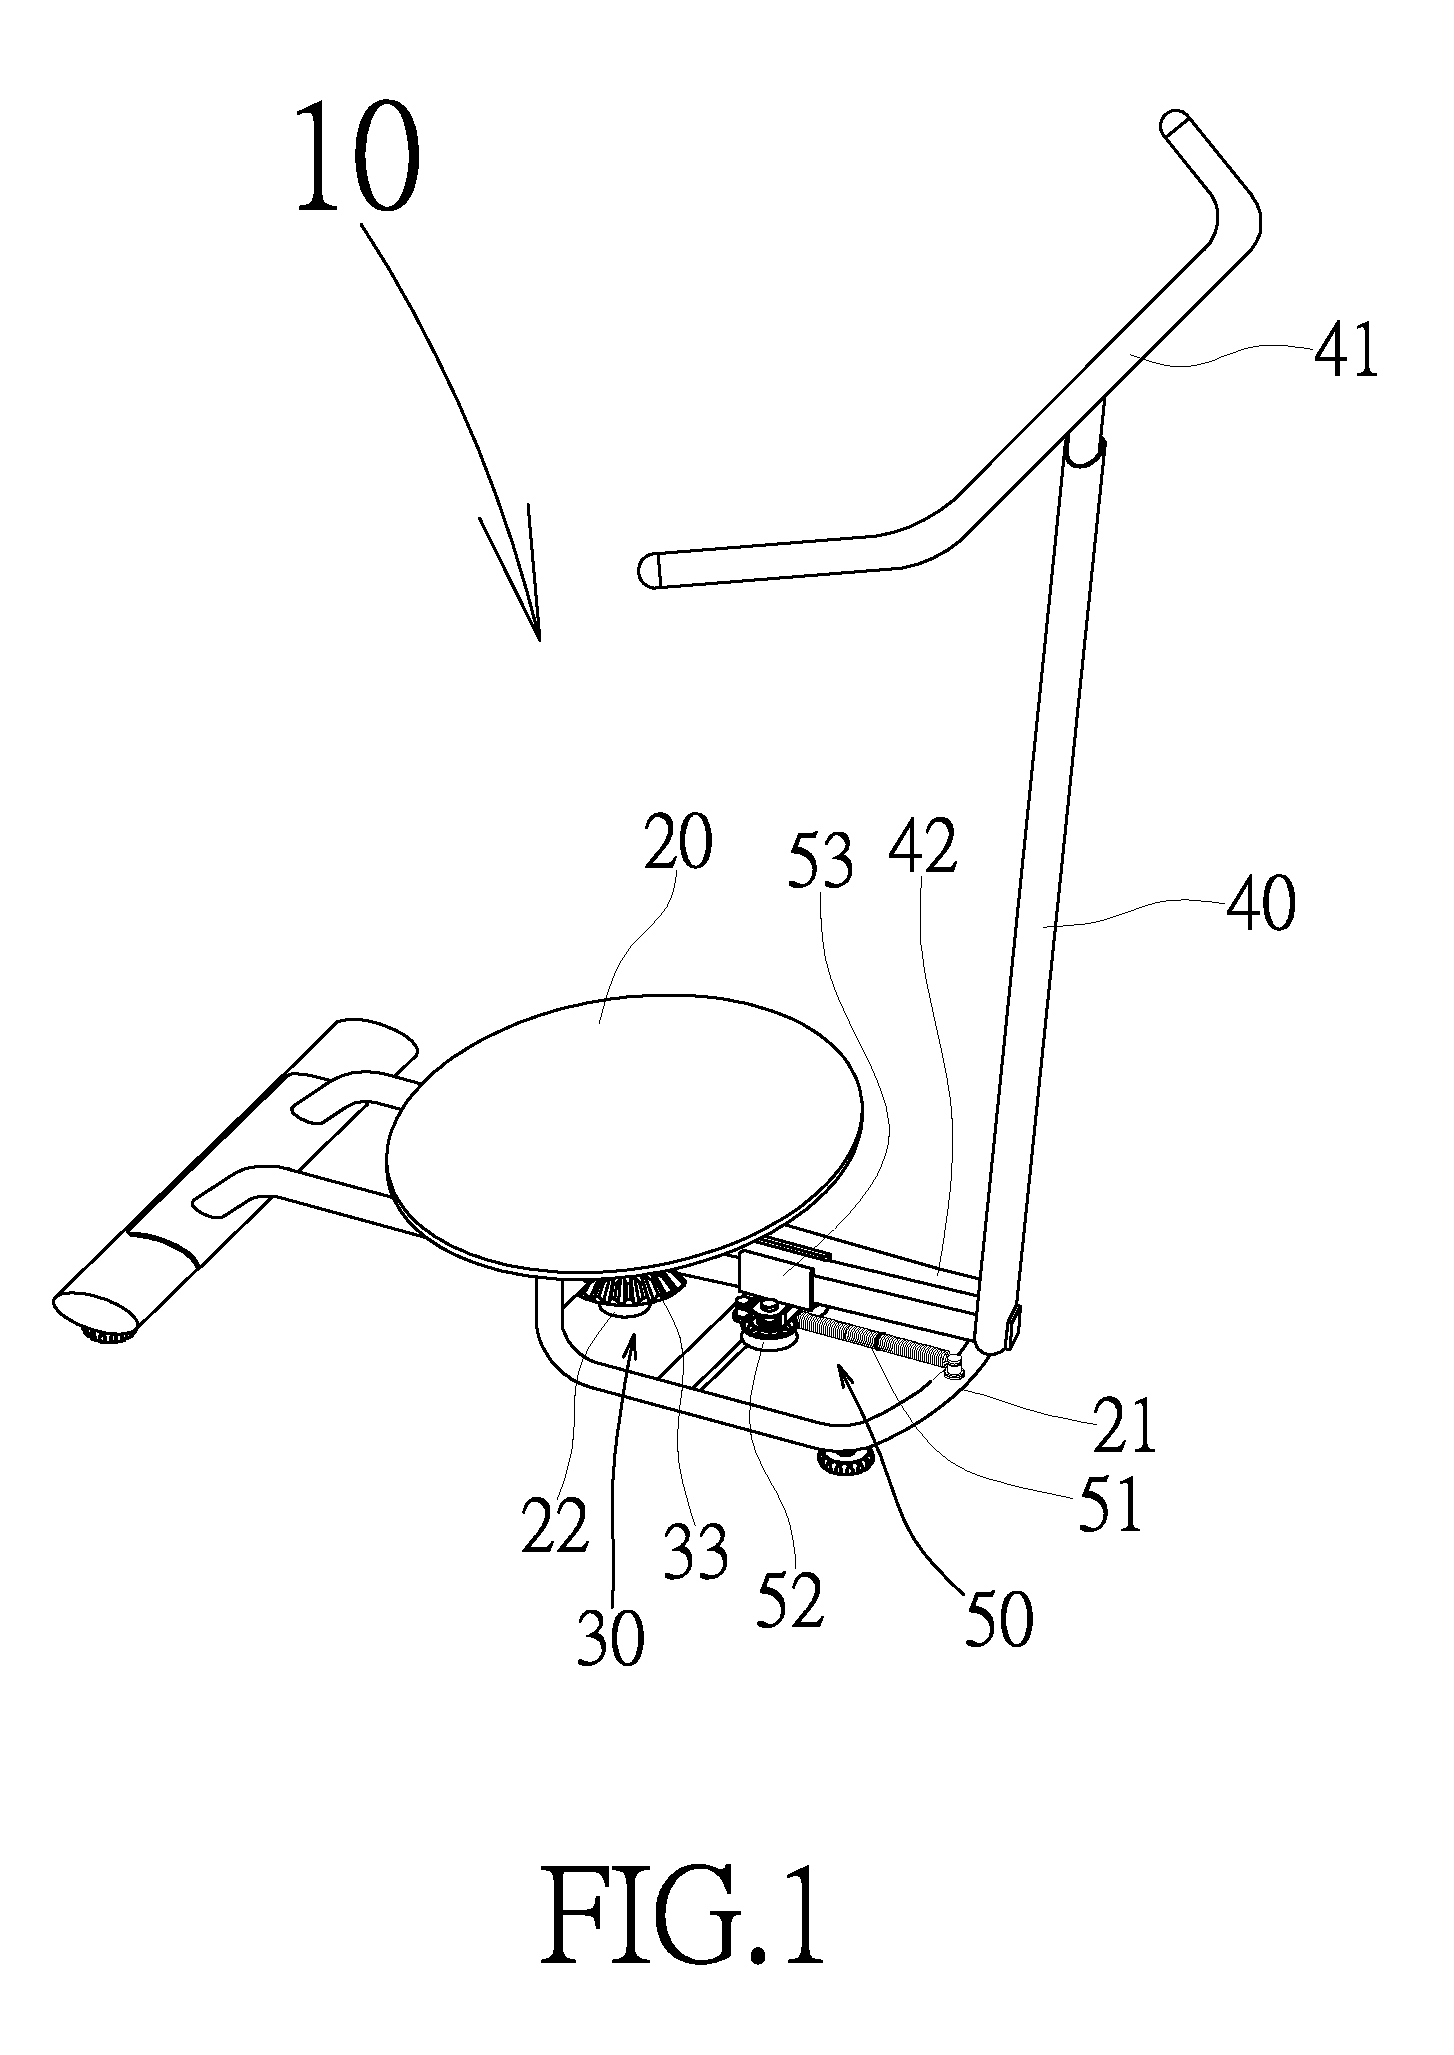 Resistance apparatus for a waist-twisting exerciser